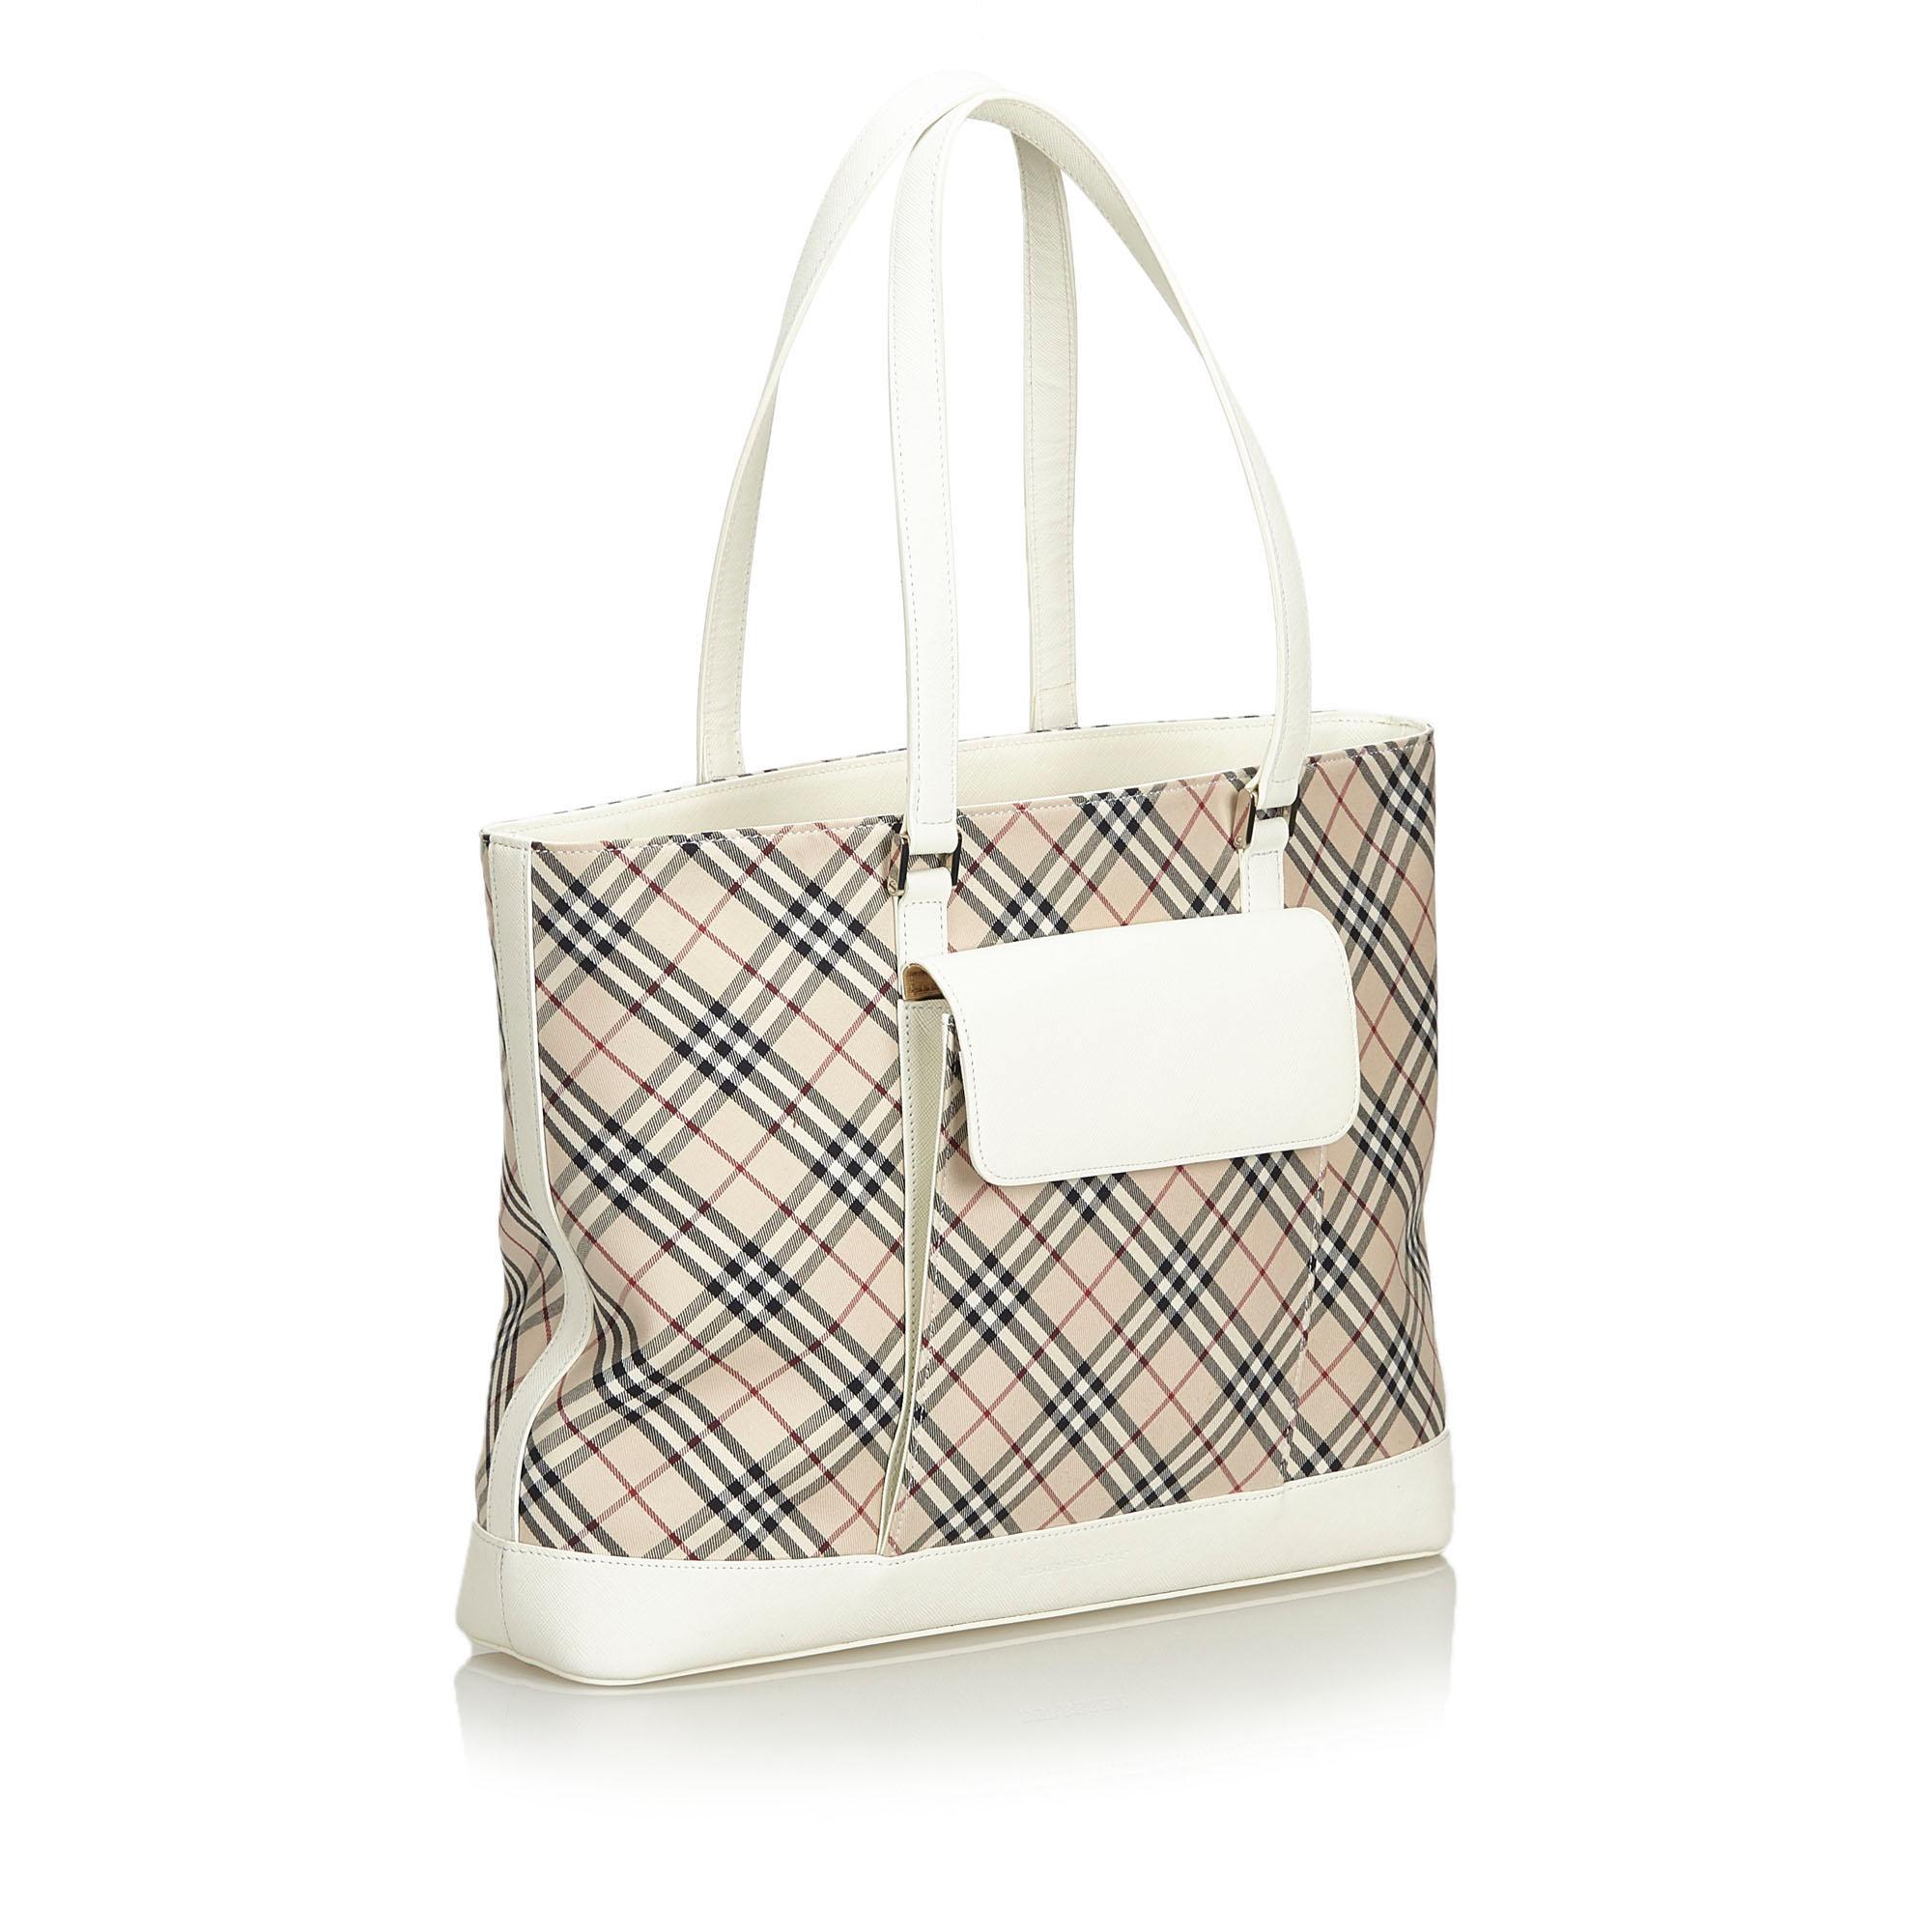 This tote bag features a plaid cotton body with leather trim, a front exterior flap pocket, flat leather straps, a top zip closure, and interior zip and slip pockets. It carries as AB condition rating.

Inclusions: 
This item does not come with